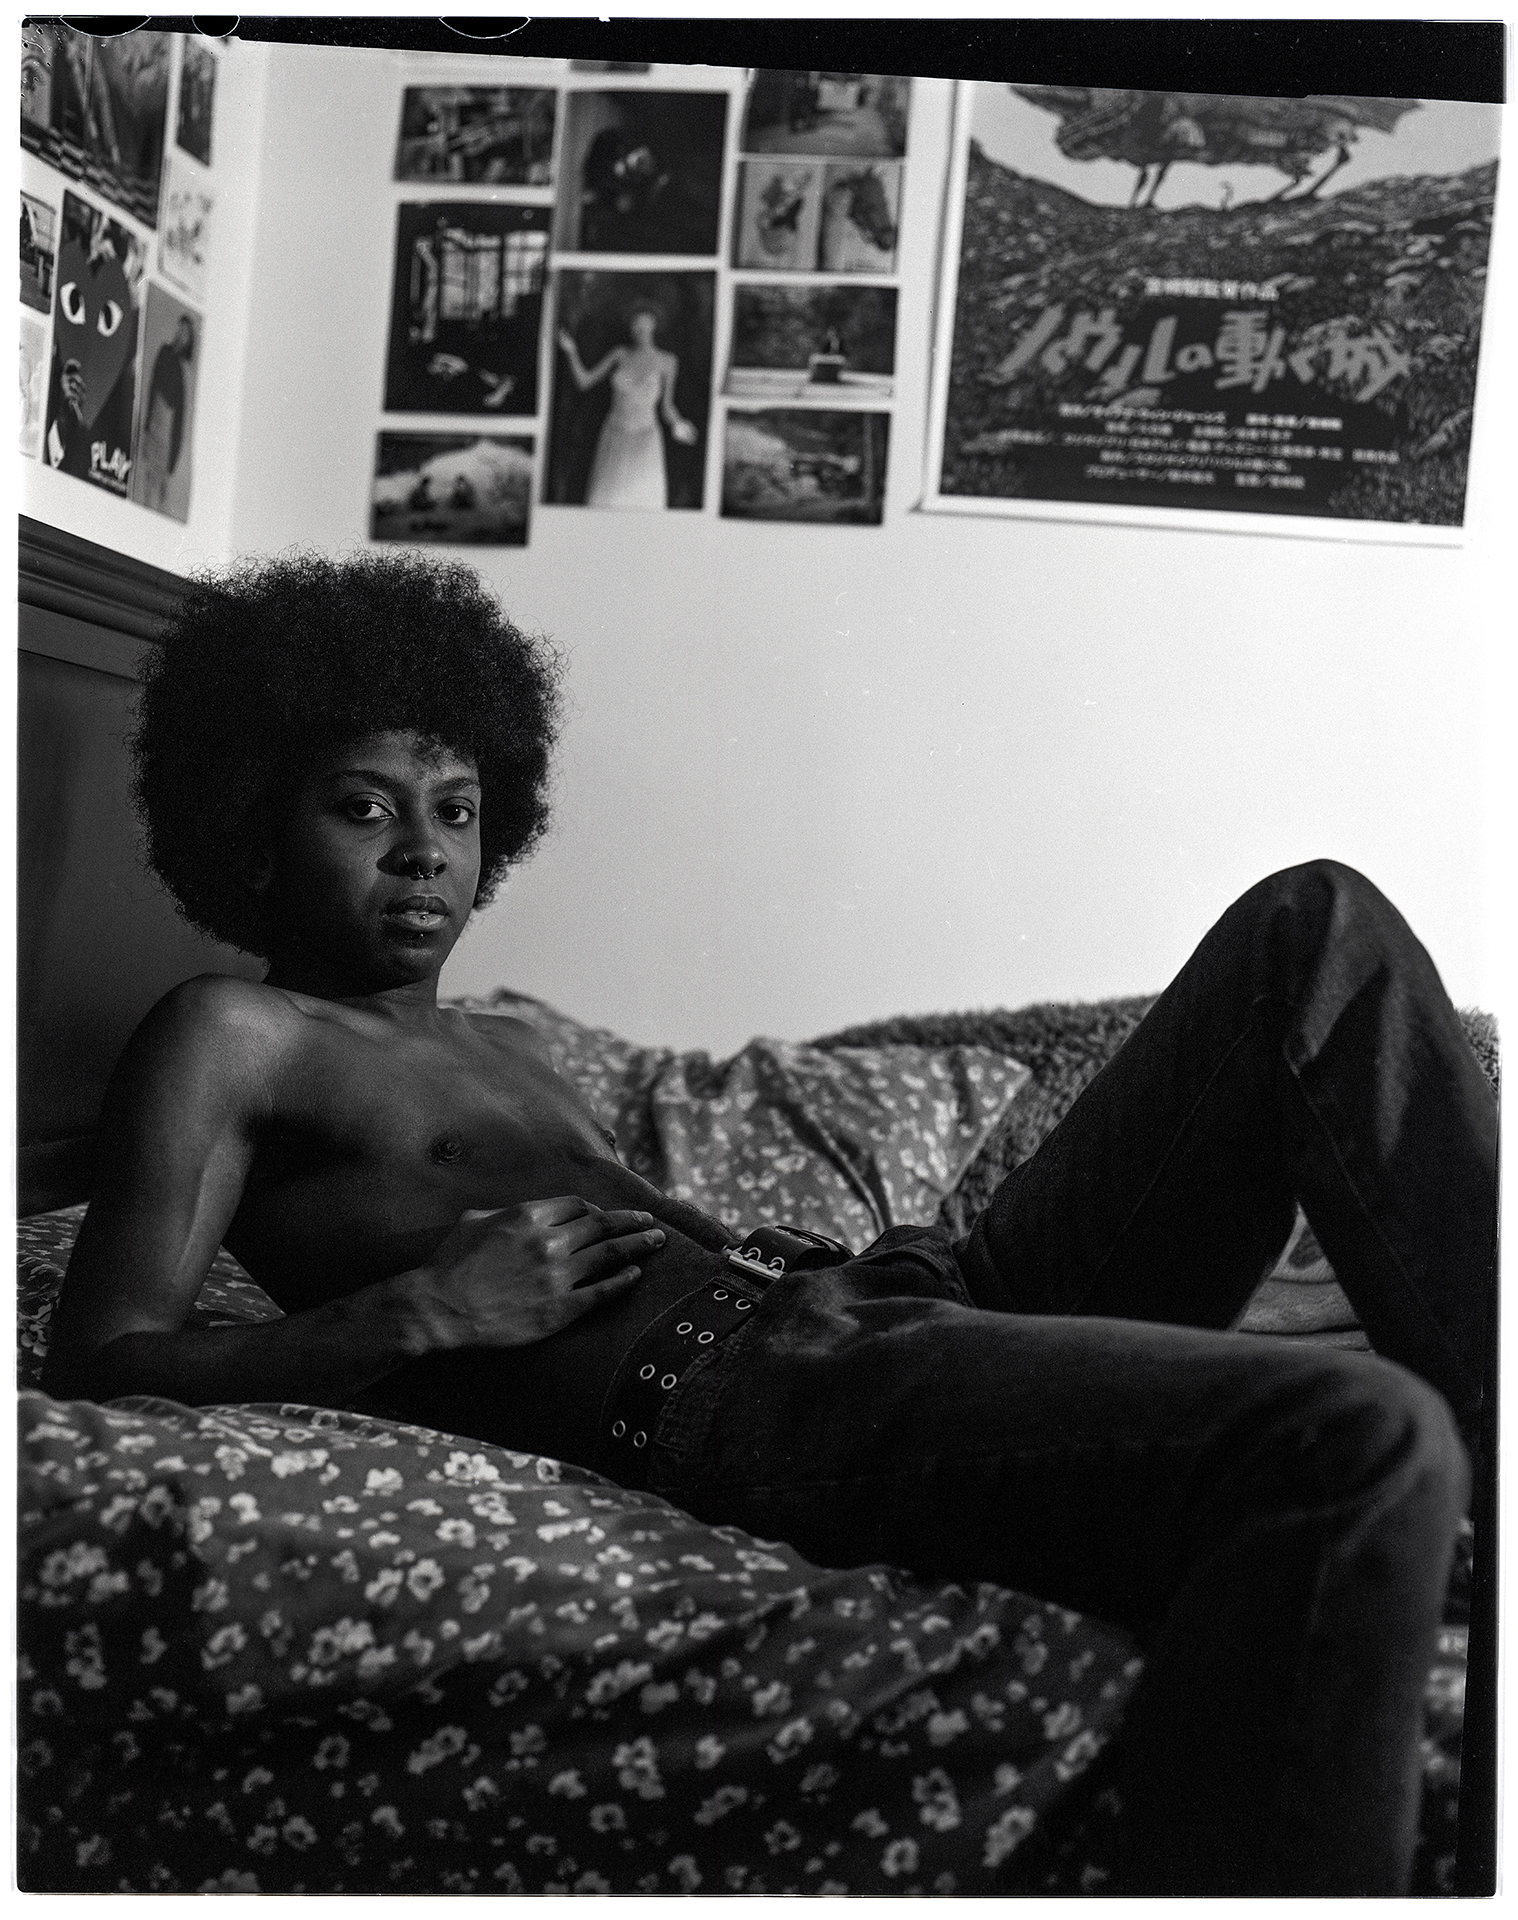 : A black and white image shot on film depicting Jayden, a person in their early 20’s with an afro. Jayden is laying shirtless on their bed. They are leaning back on their elbows while looking directly into the camera. They are wearing dark jeans and a belt.